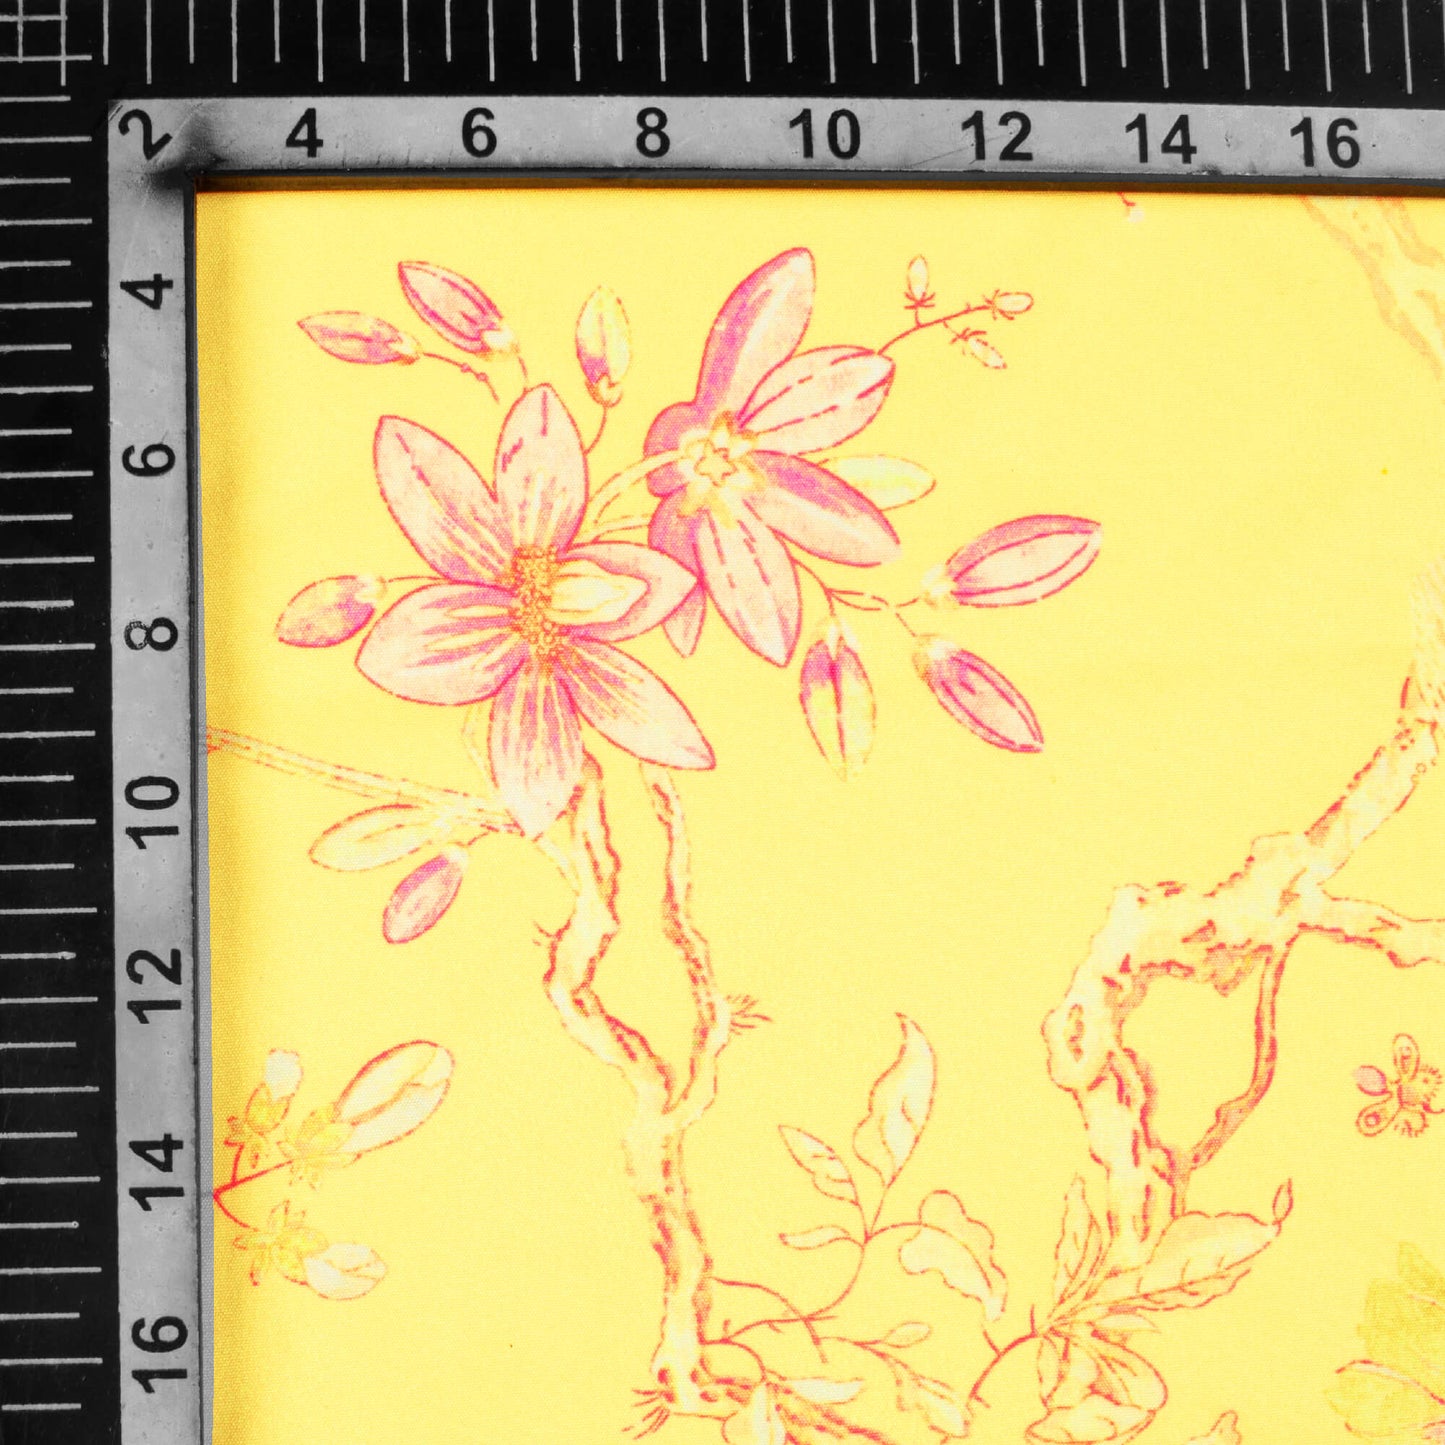 Mellow Yellow And Rose Pink Floral Pattern Digital Print Ultra Premium Butter Crepe Fabric